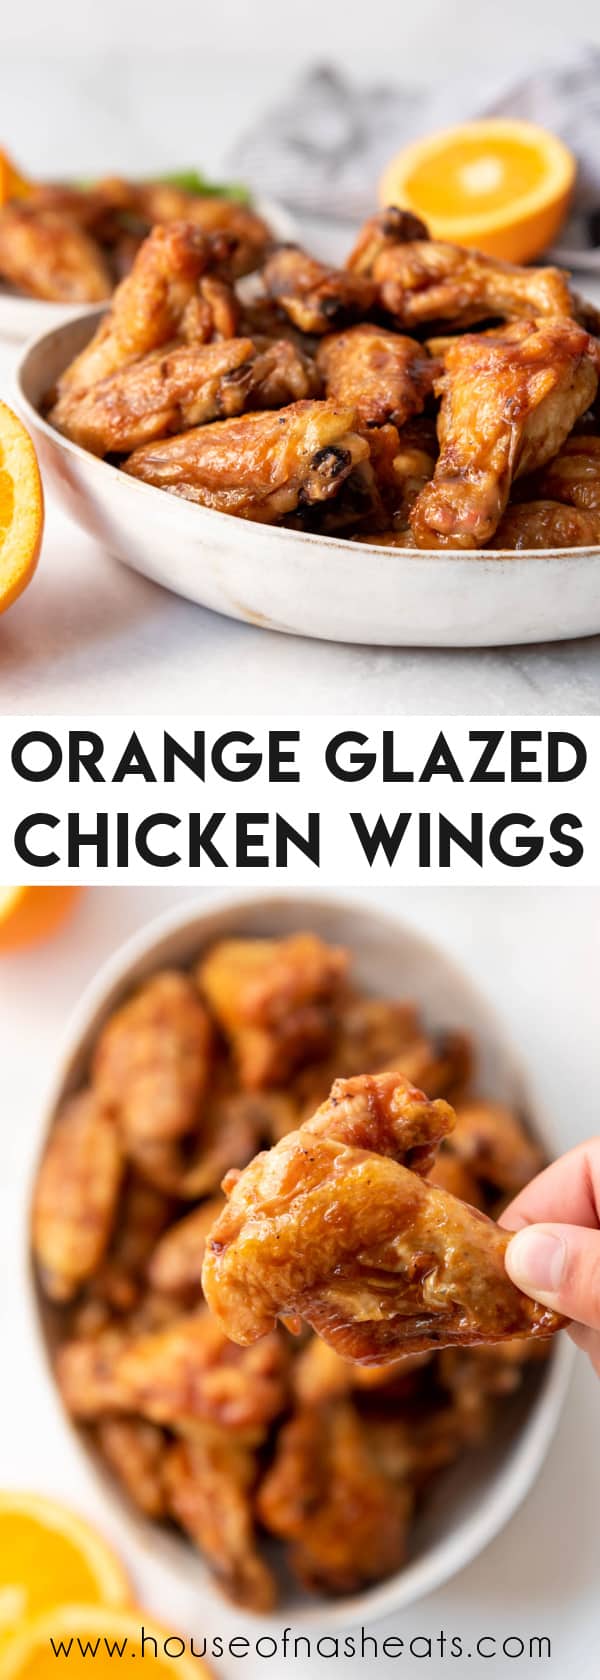 A collage of images of orange glazed chicken wings with text overlay.